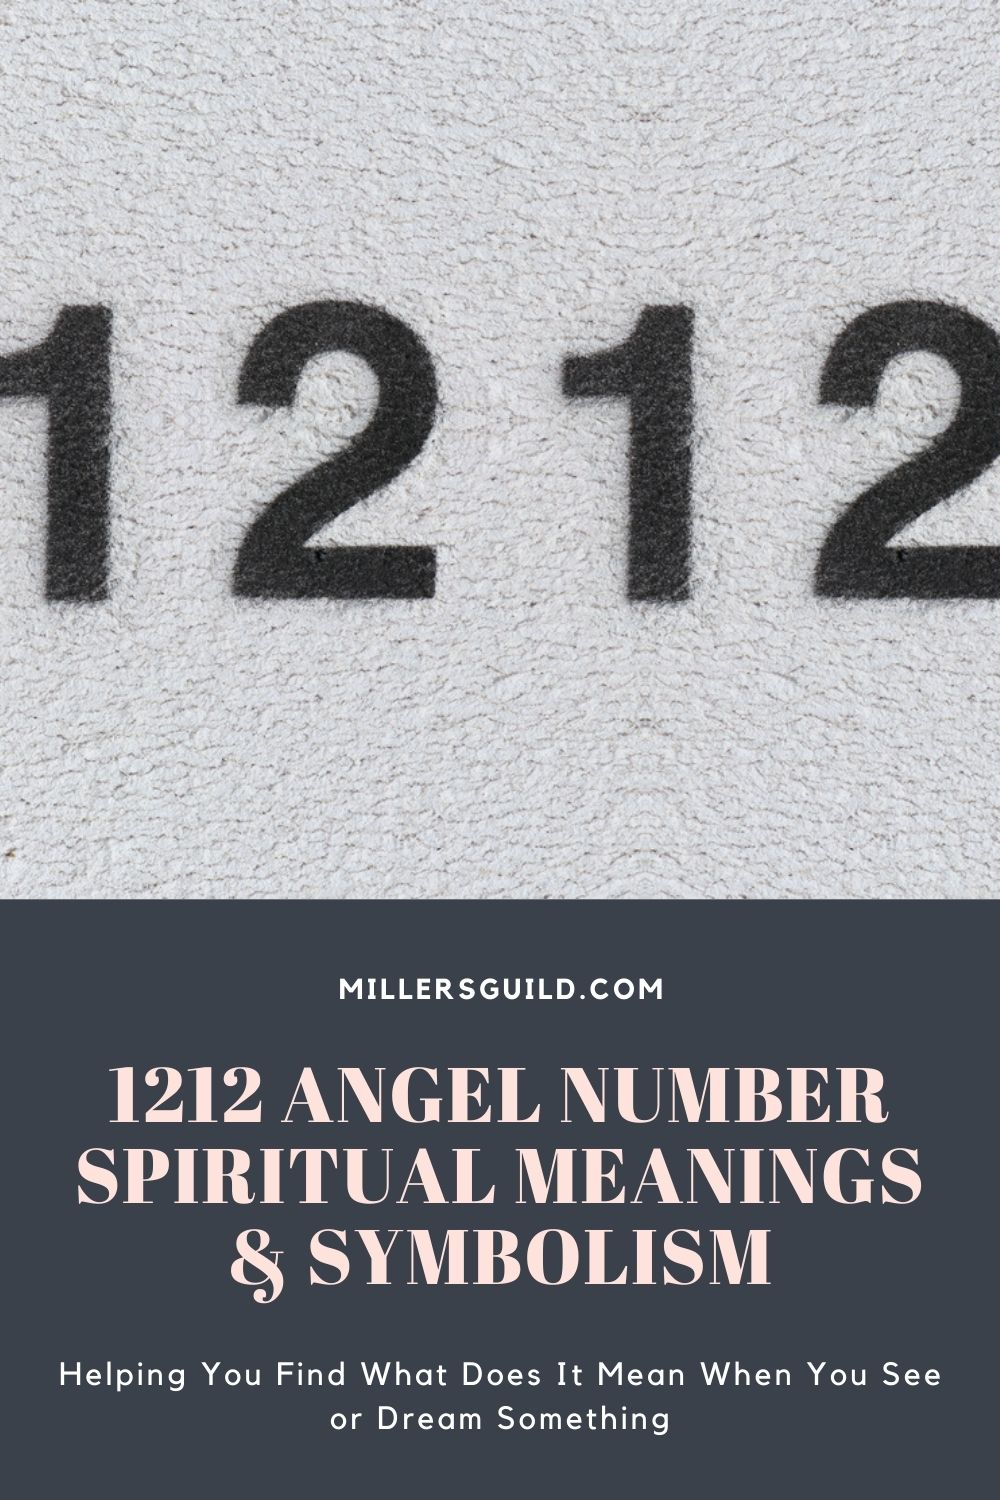 1212 Angel Number Spiritual Meanings & Symbolism 1